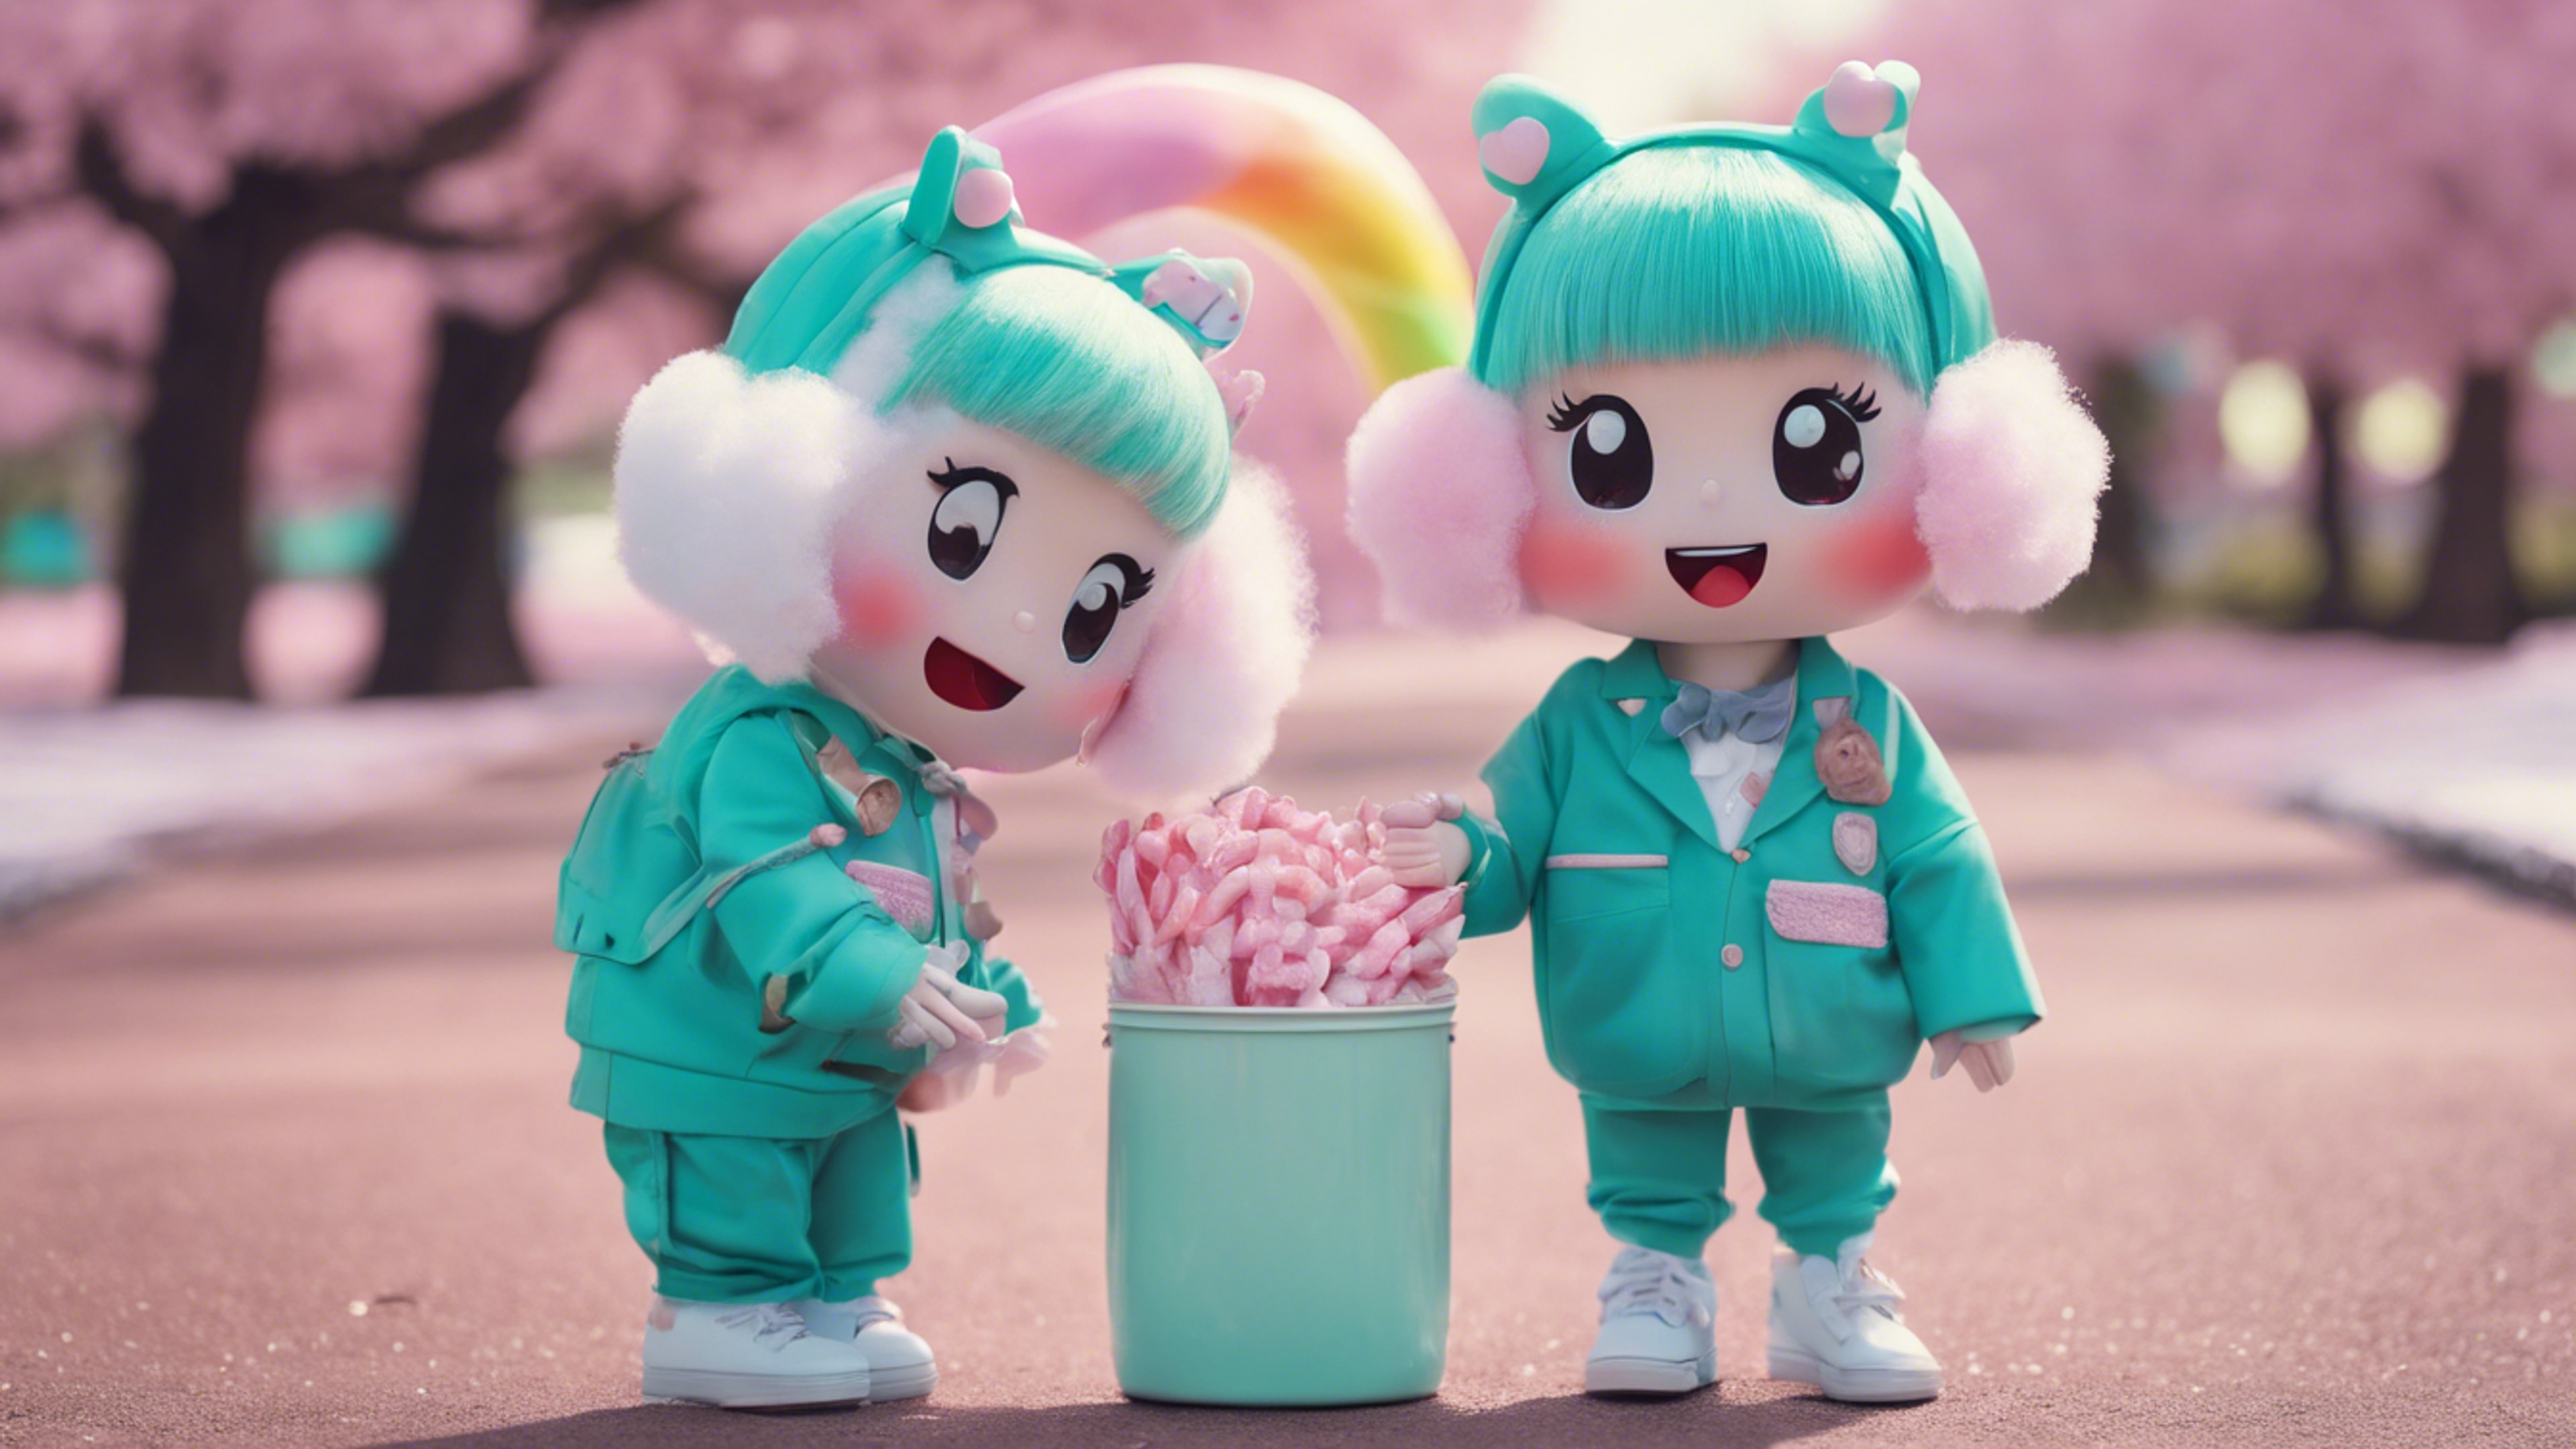 A rom-com themed image of two Kawaii characters in teal outfits, sharing a candy cotton under a pastel rainbow in a park.壁紙[b2e8e1dcfc3f406f9356]